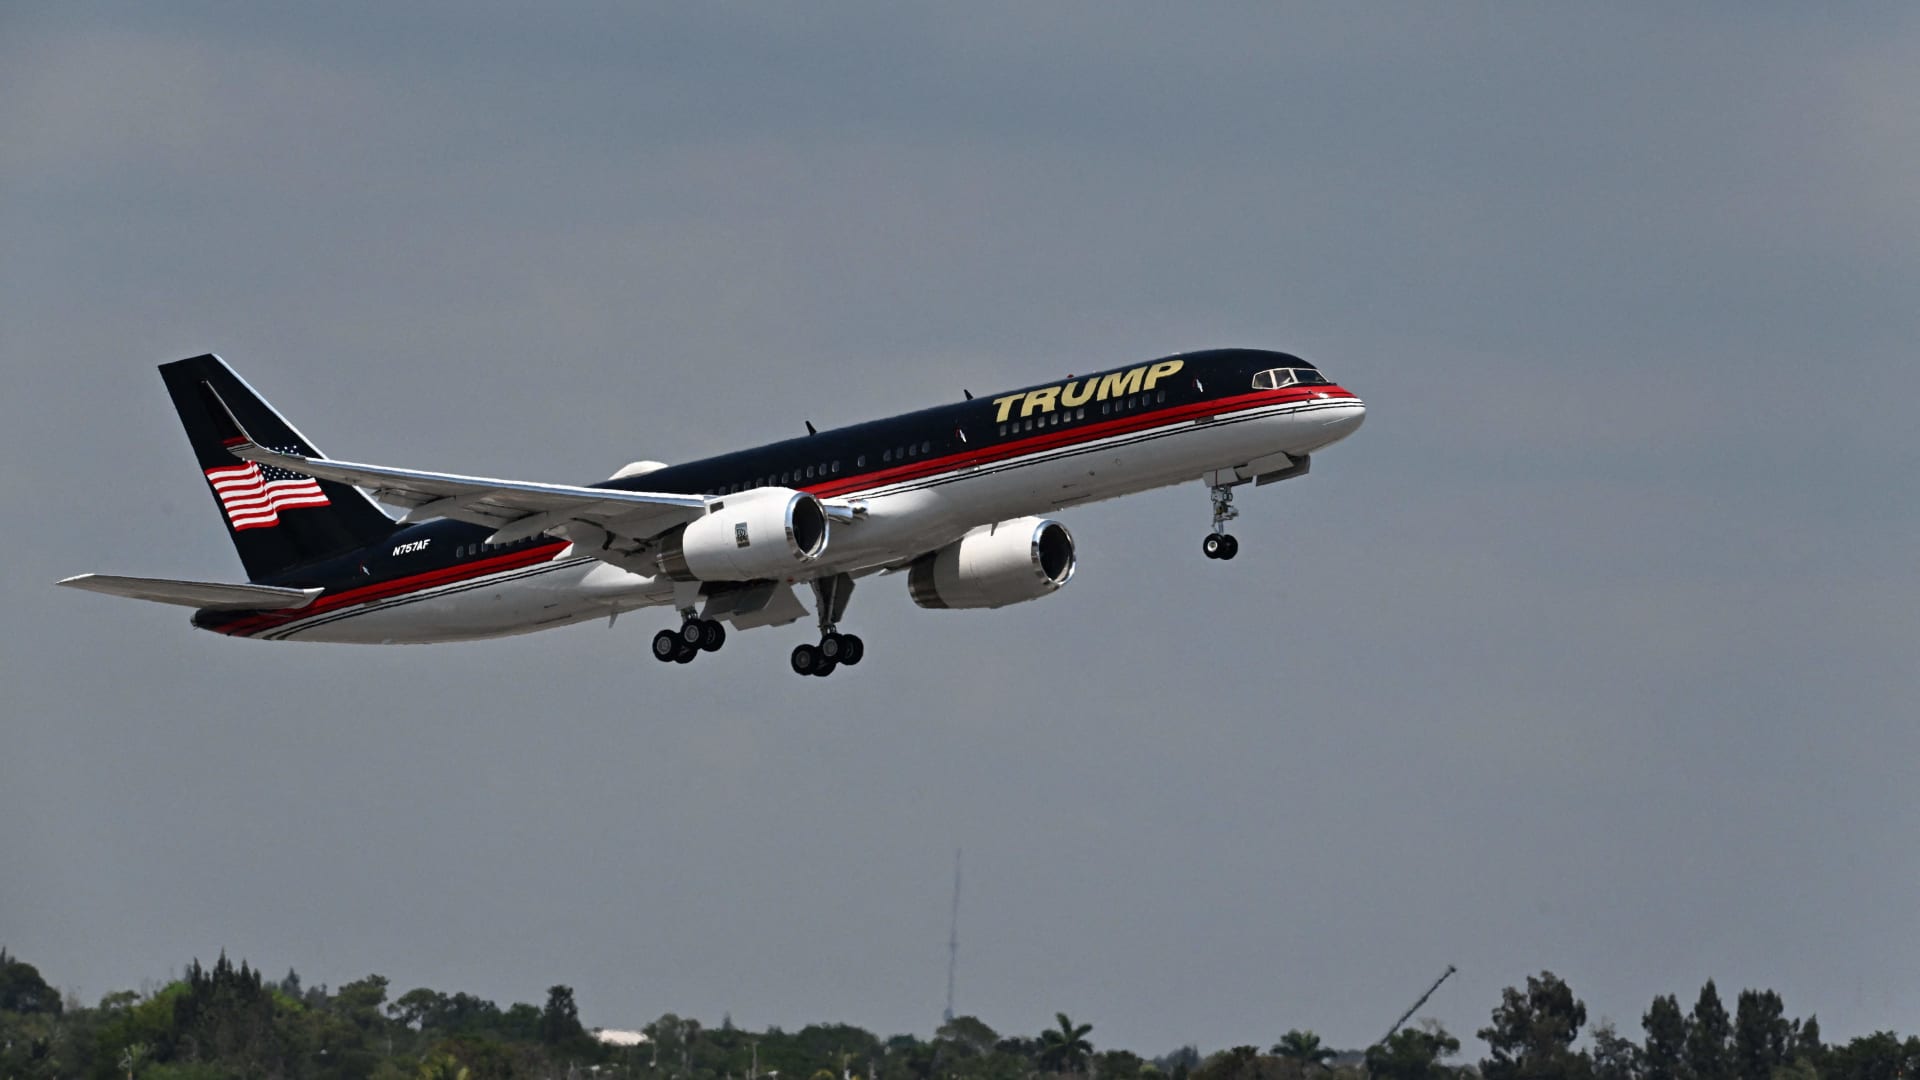 Trump's Boeing 757 clipped parked plane while landing at Florida airport Sunday, FAA says